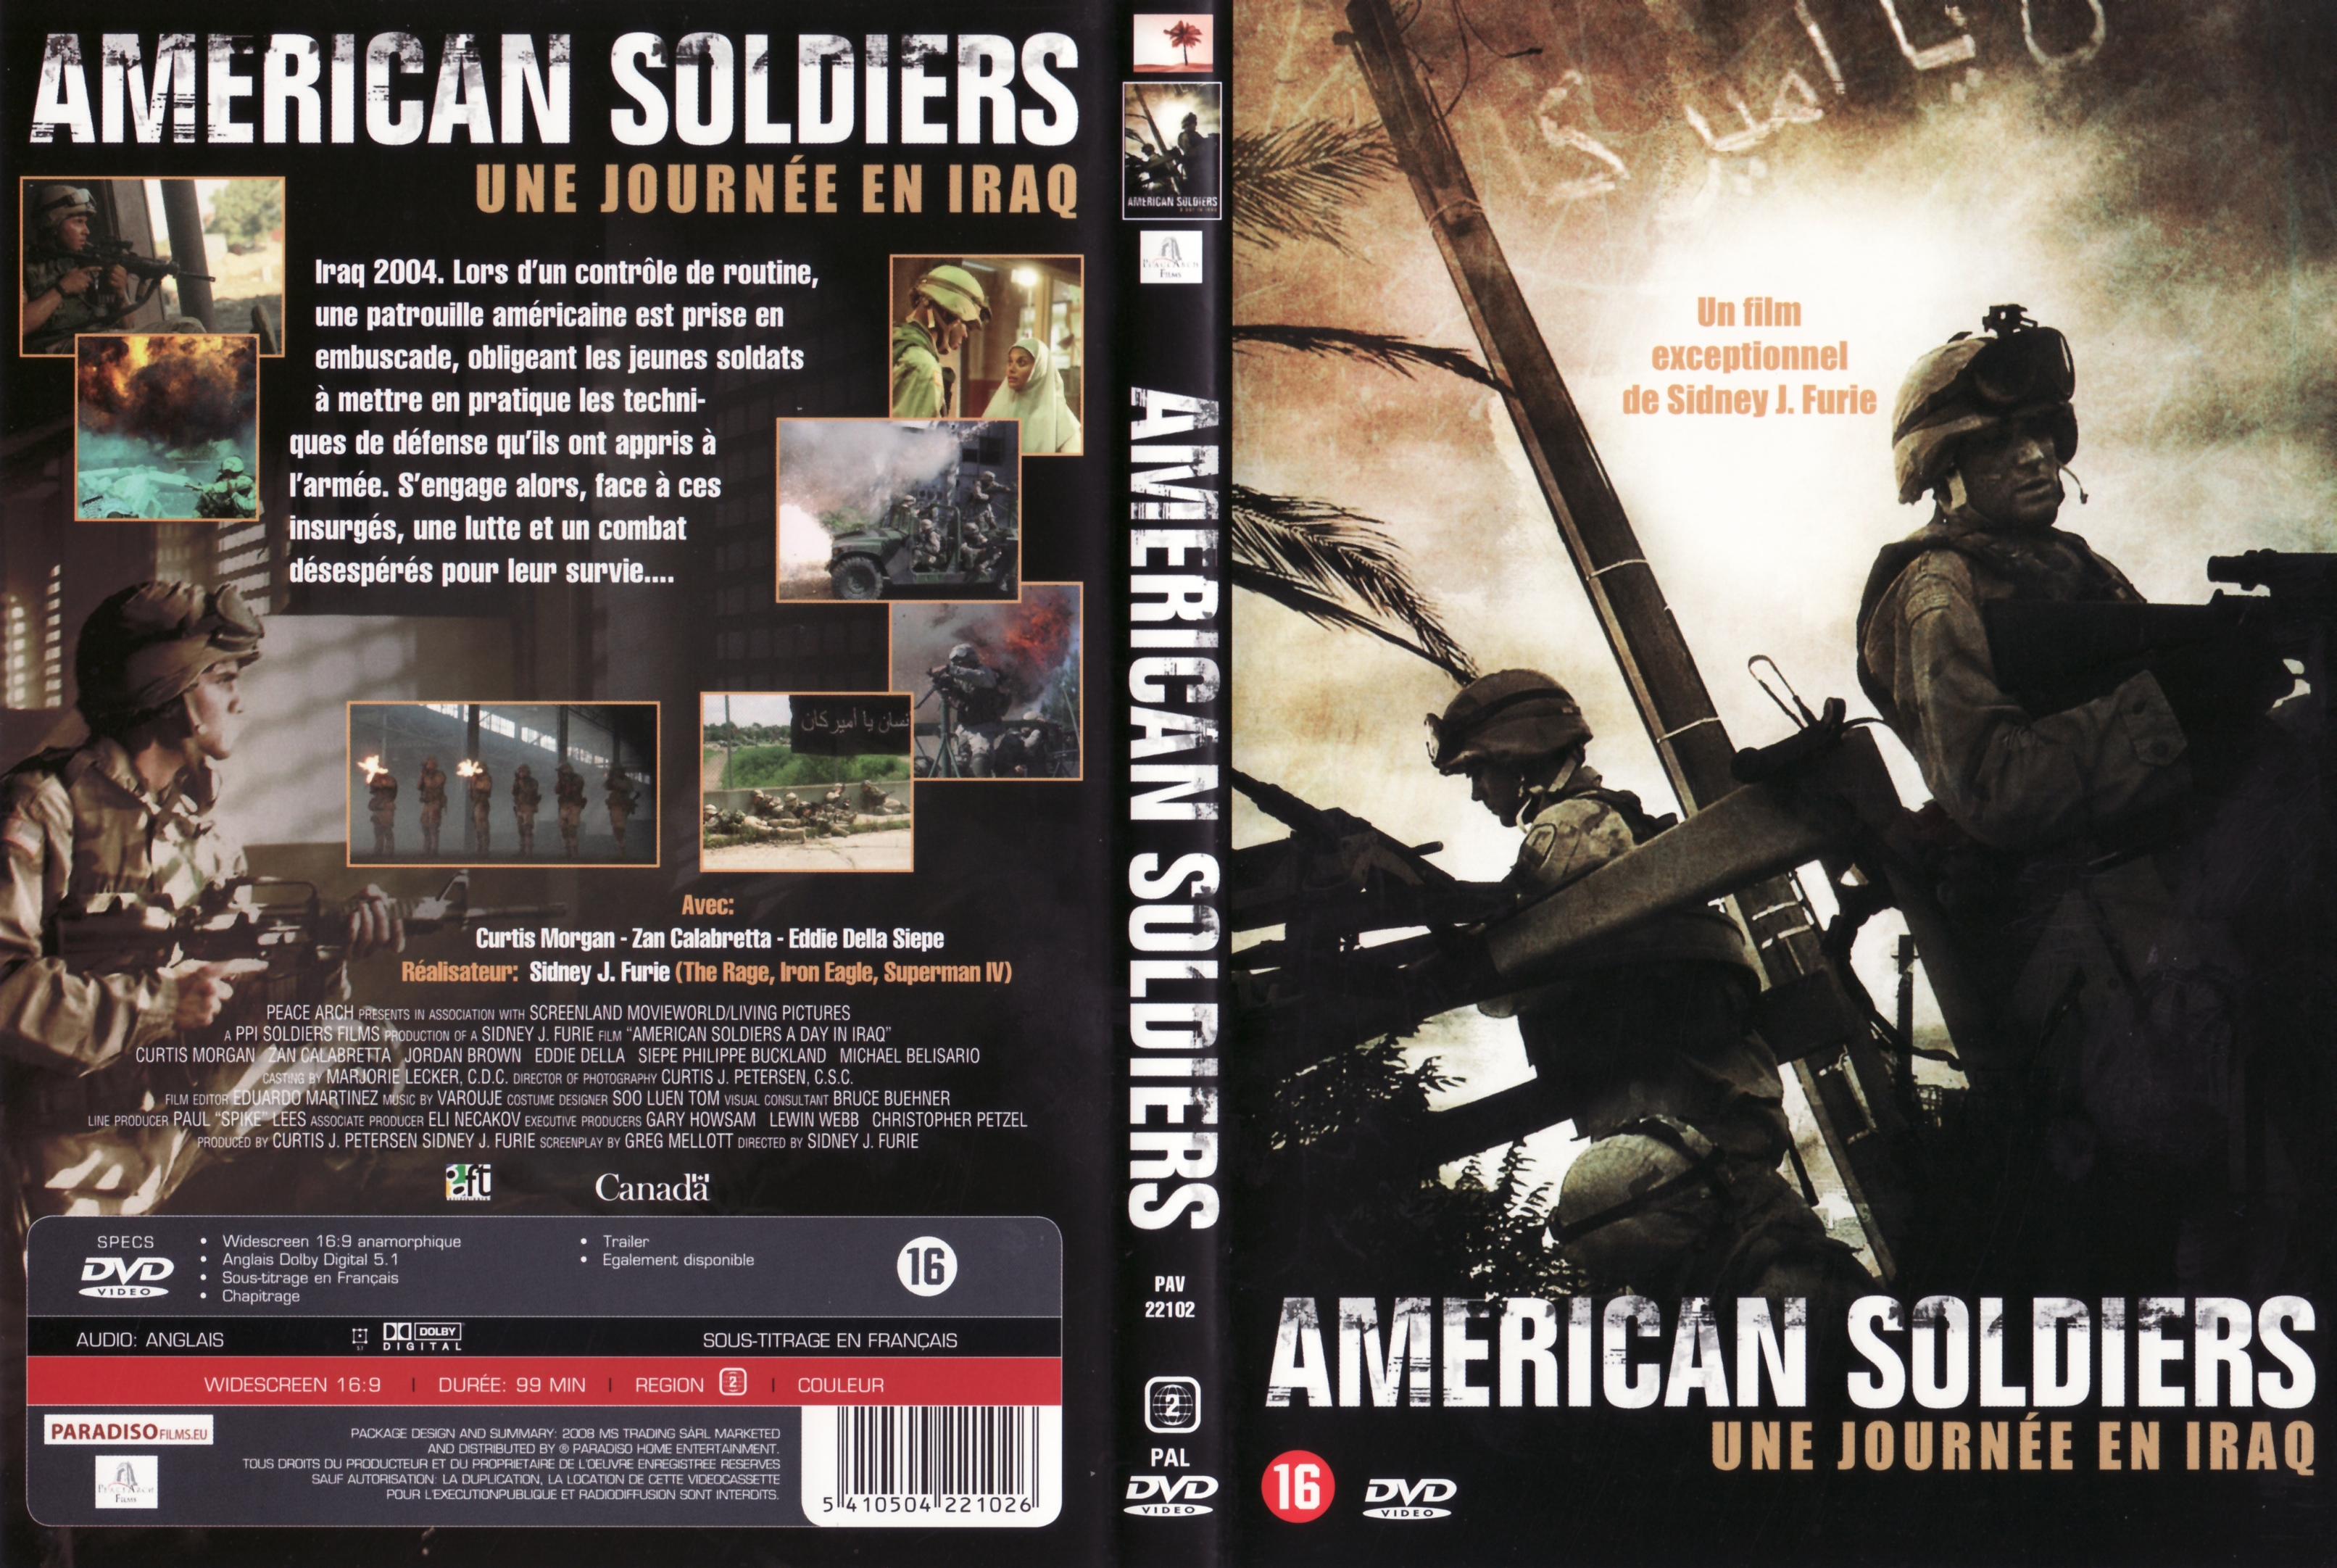 Jaquette DVD American soldiers